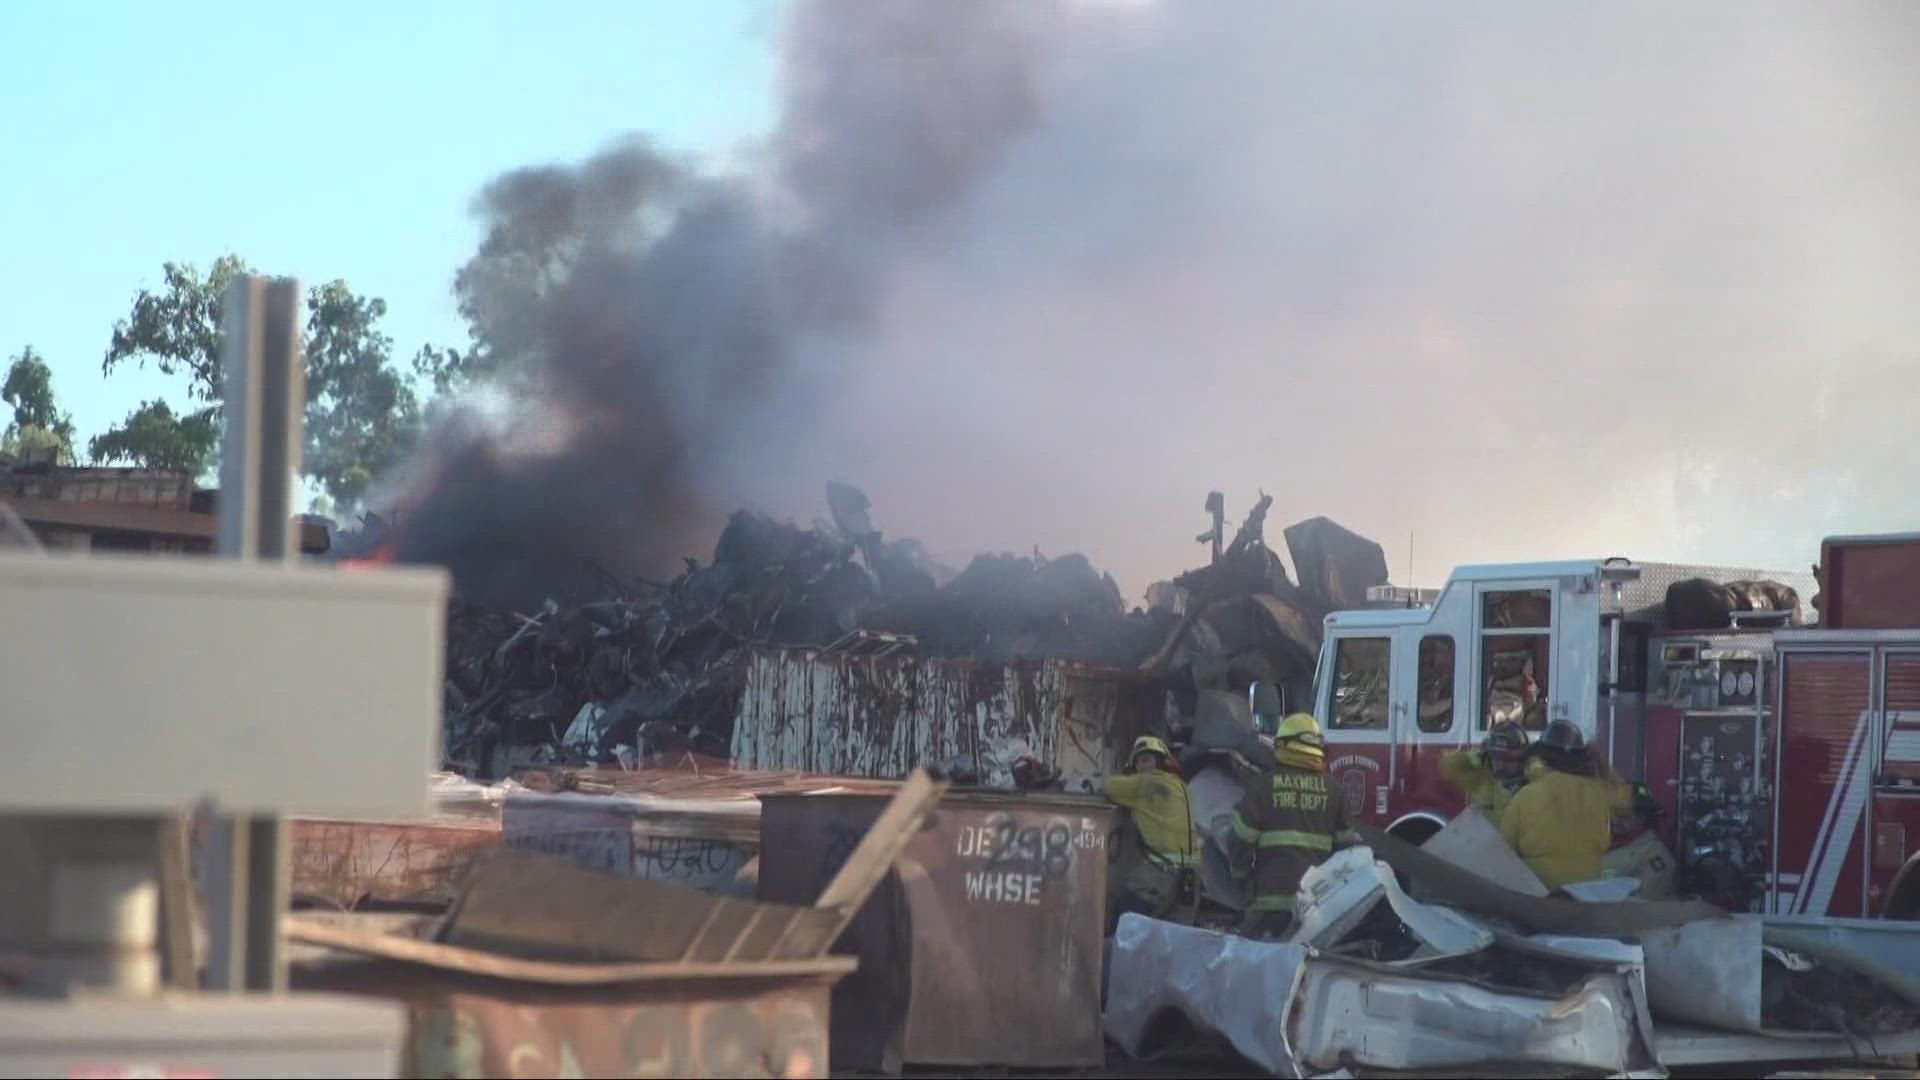 A fire that began in a steel recycling yard continues to burn in Yuba City.